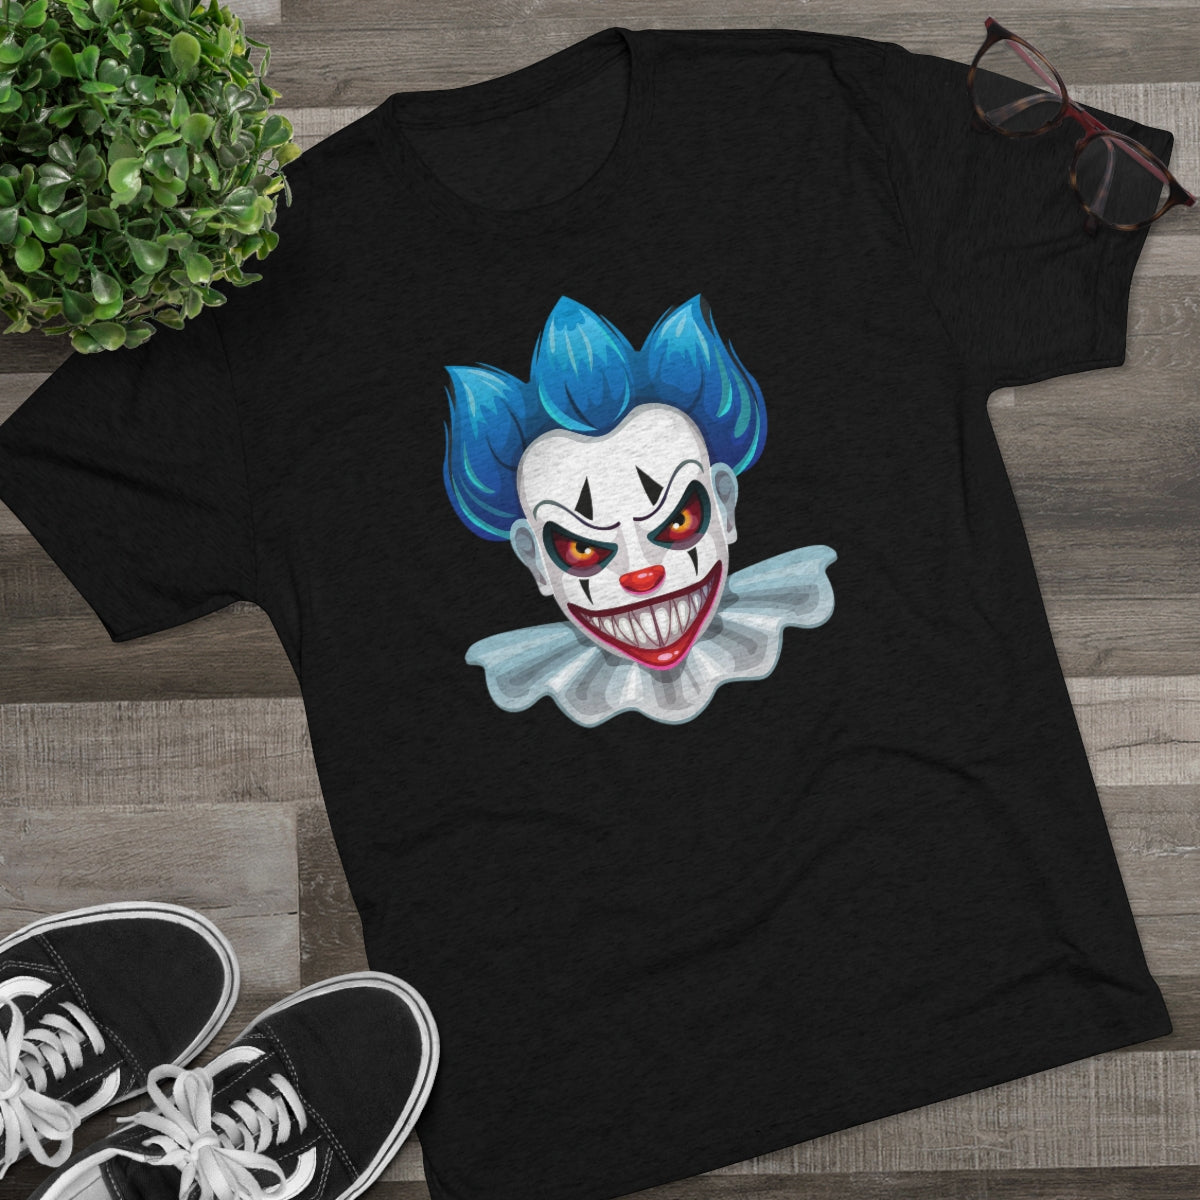 Special Collection – Phobia: Coulrophobia – Unisex Tri-Blend Crew Tee